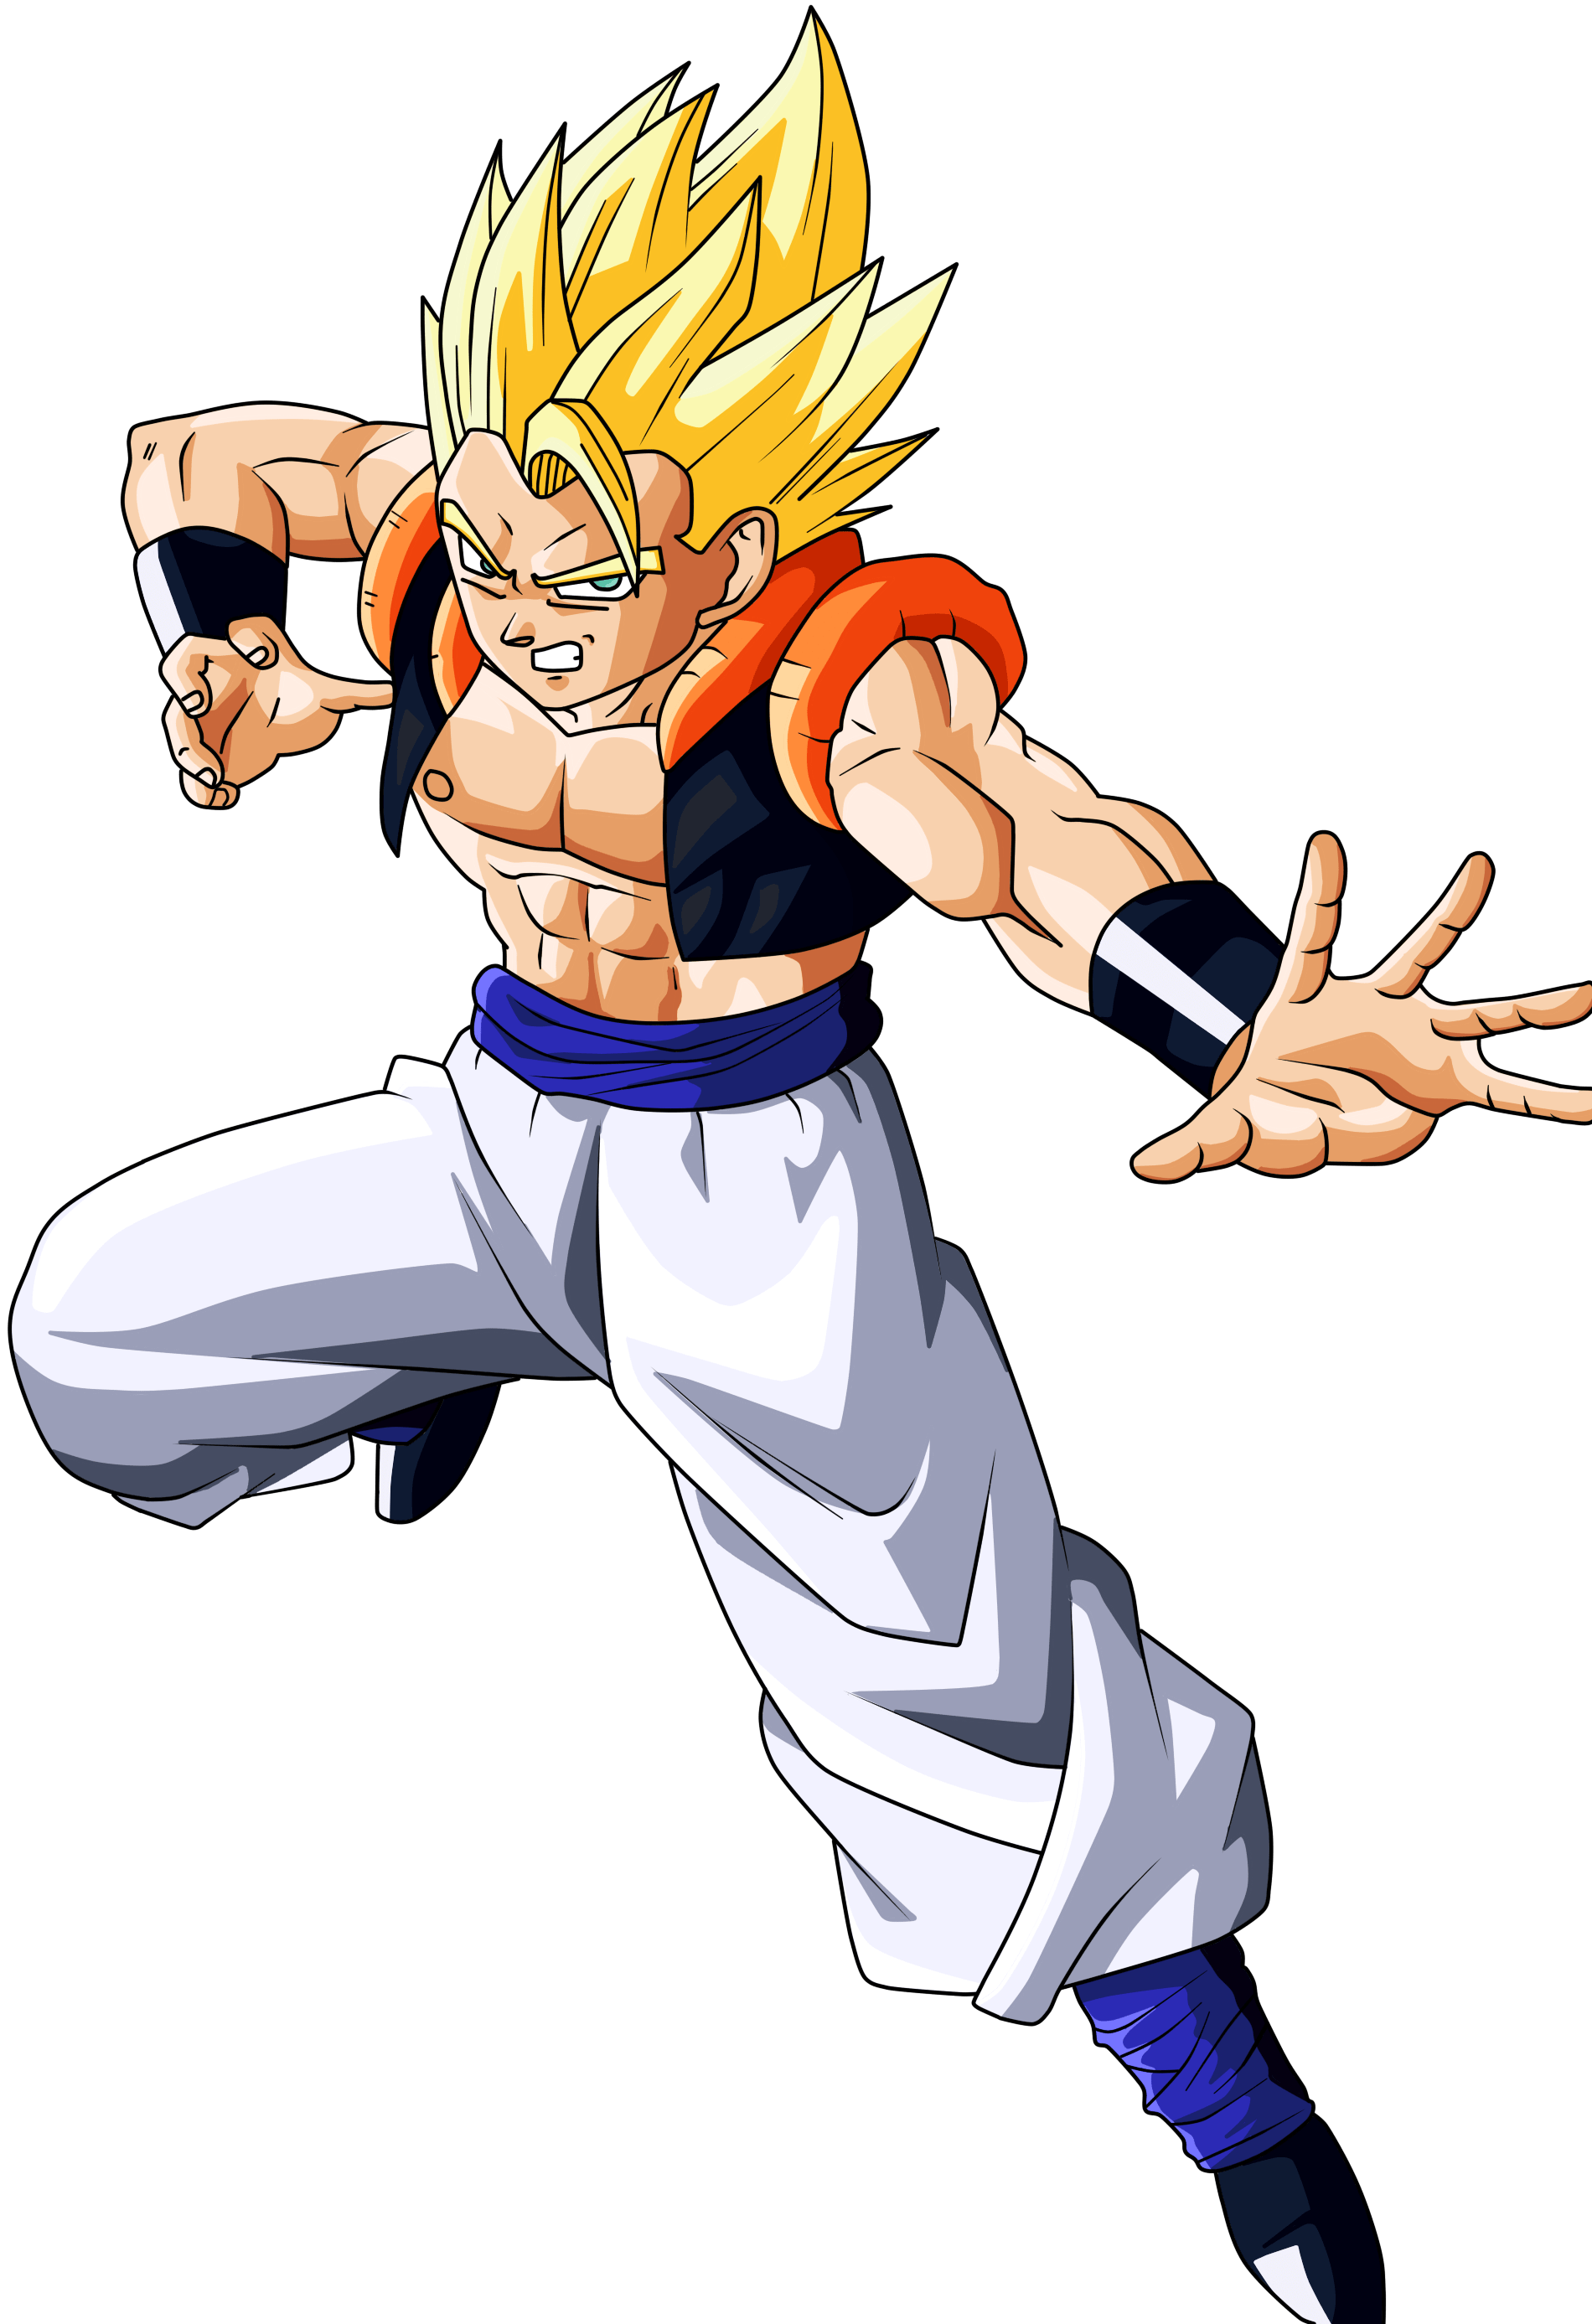 Clip art dragon ball super pictures and ideas on meta networks jpg